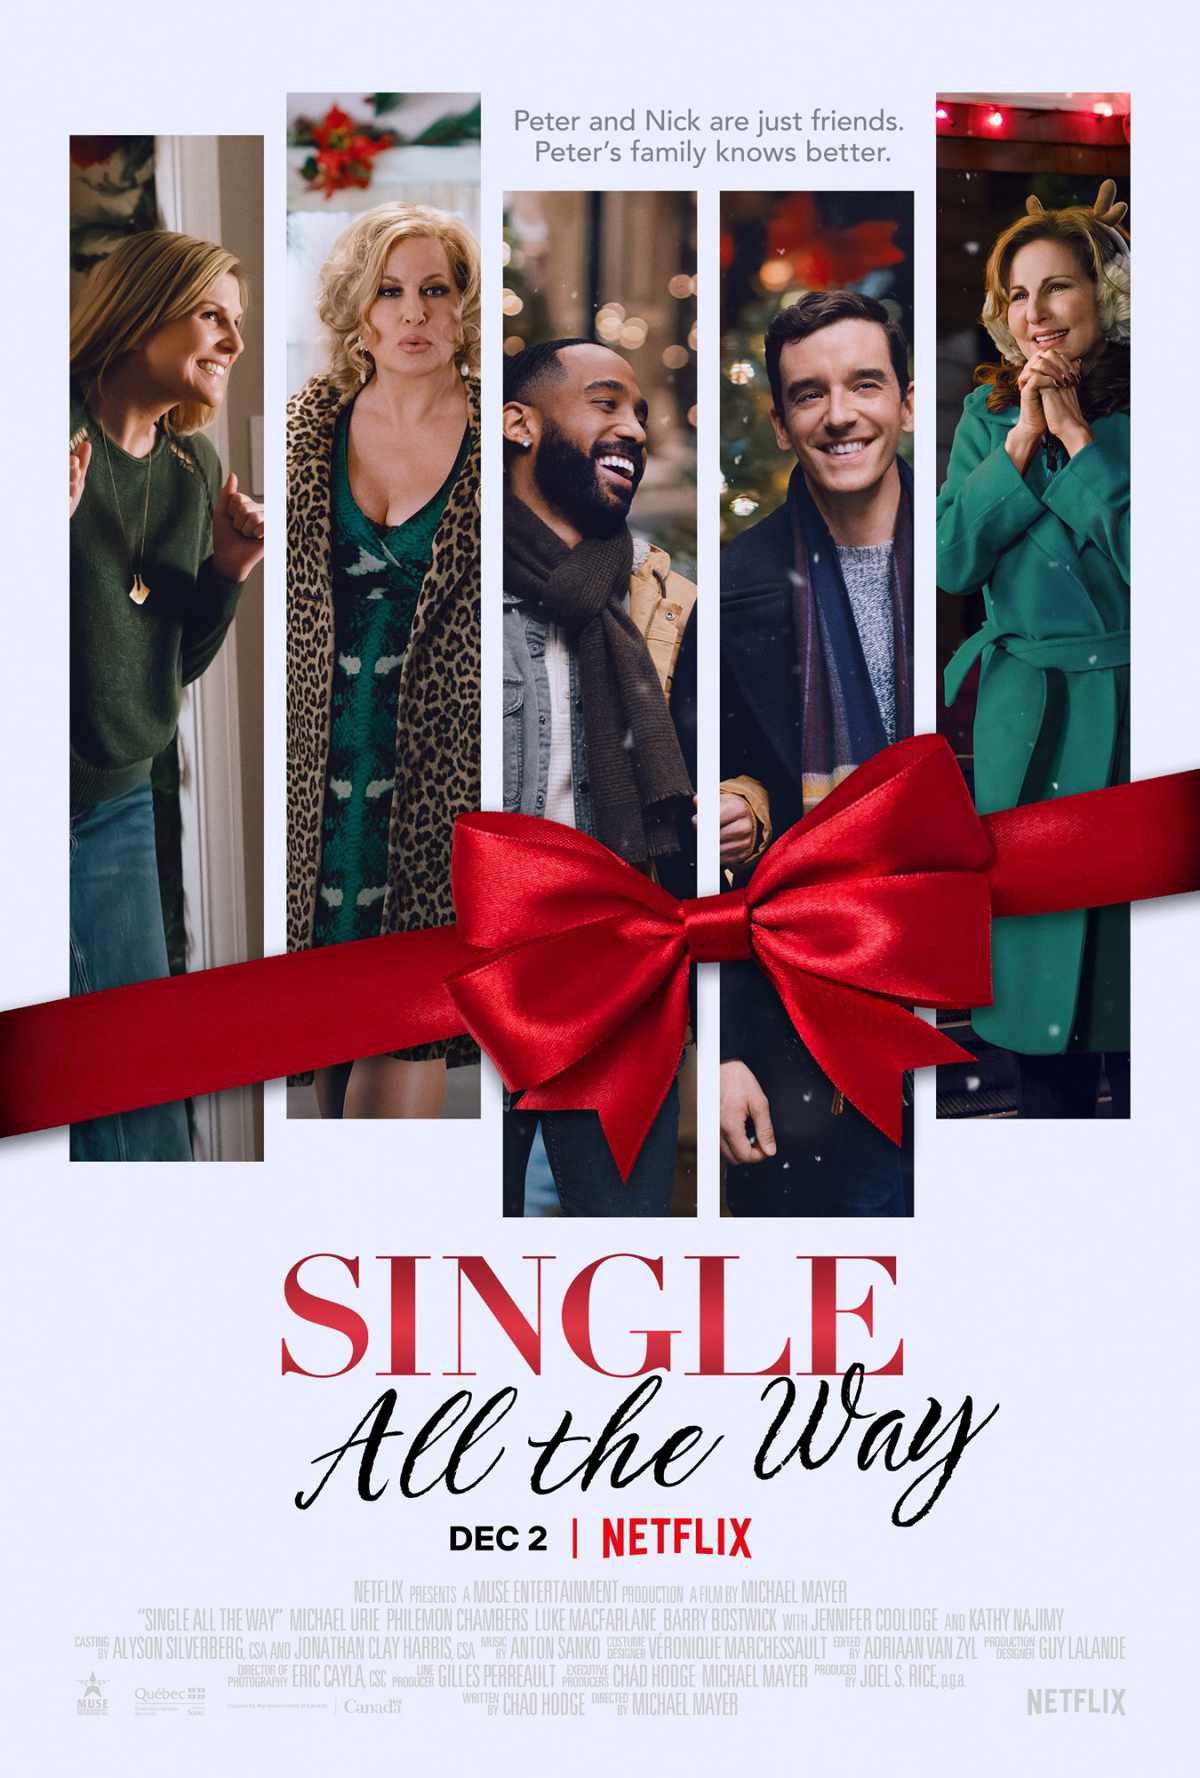 Single All the Way Is the Netflix Holiday Rom-Com We Deserve